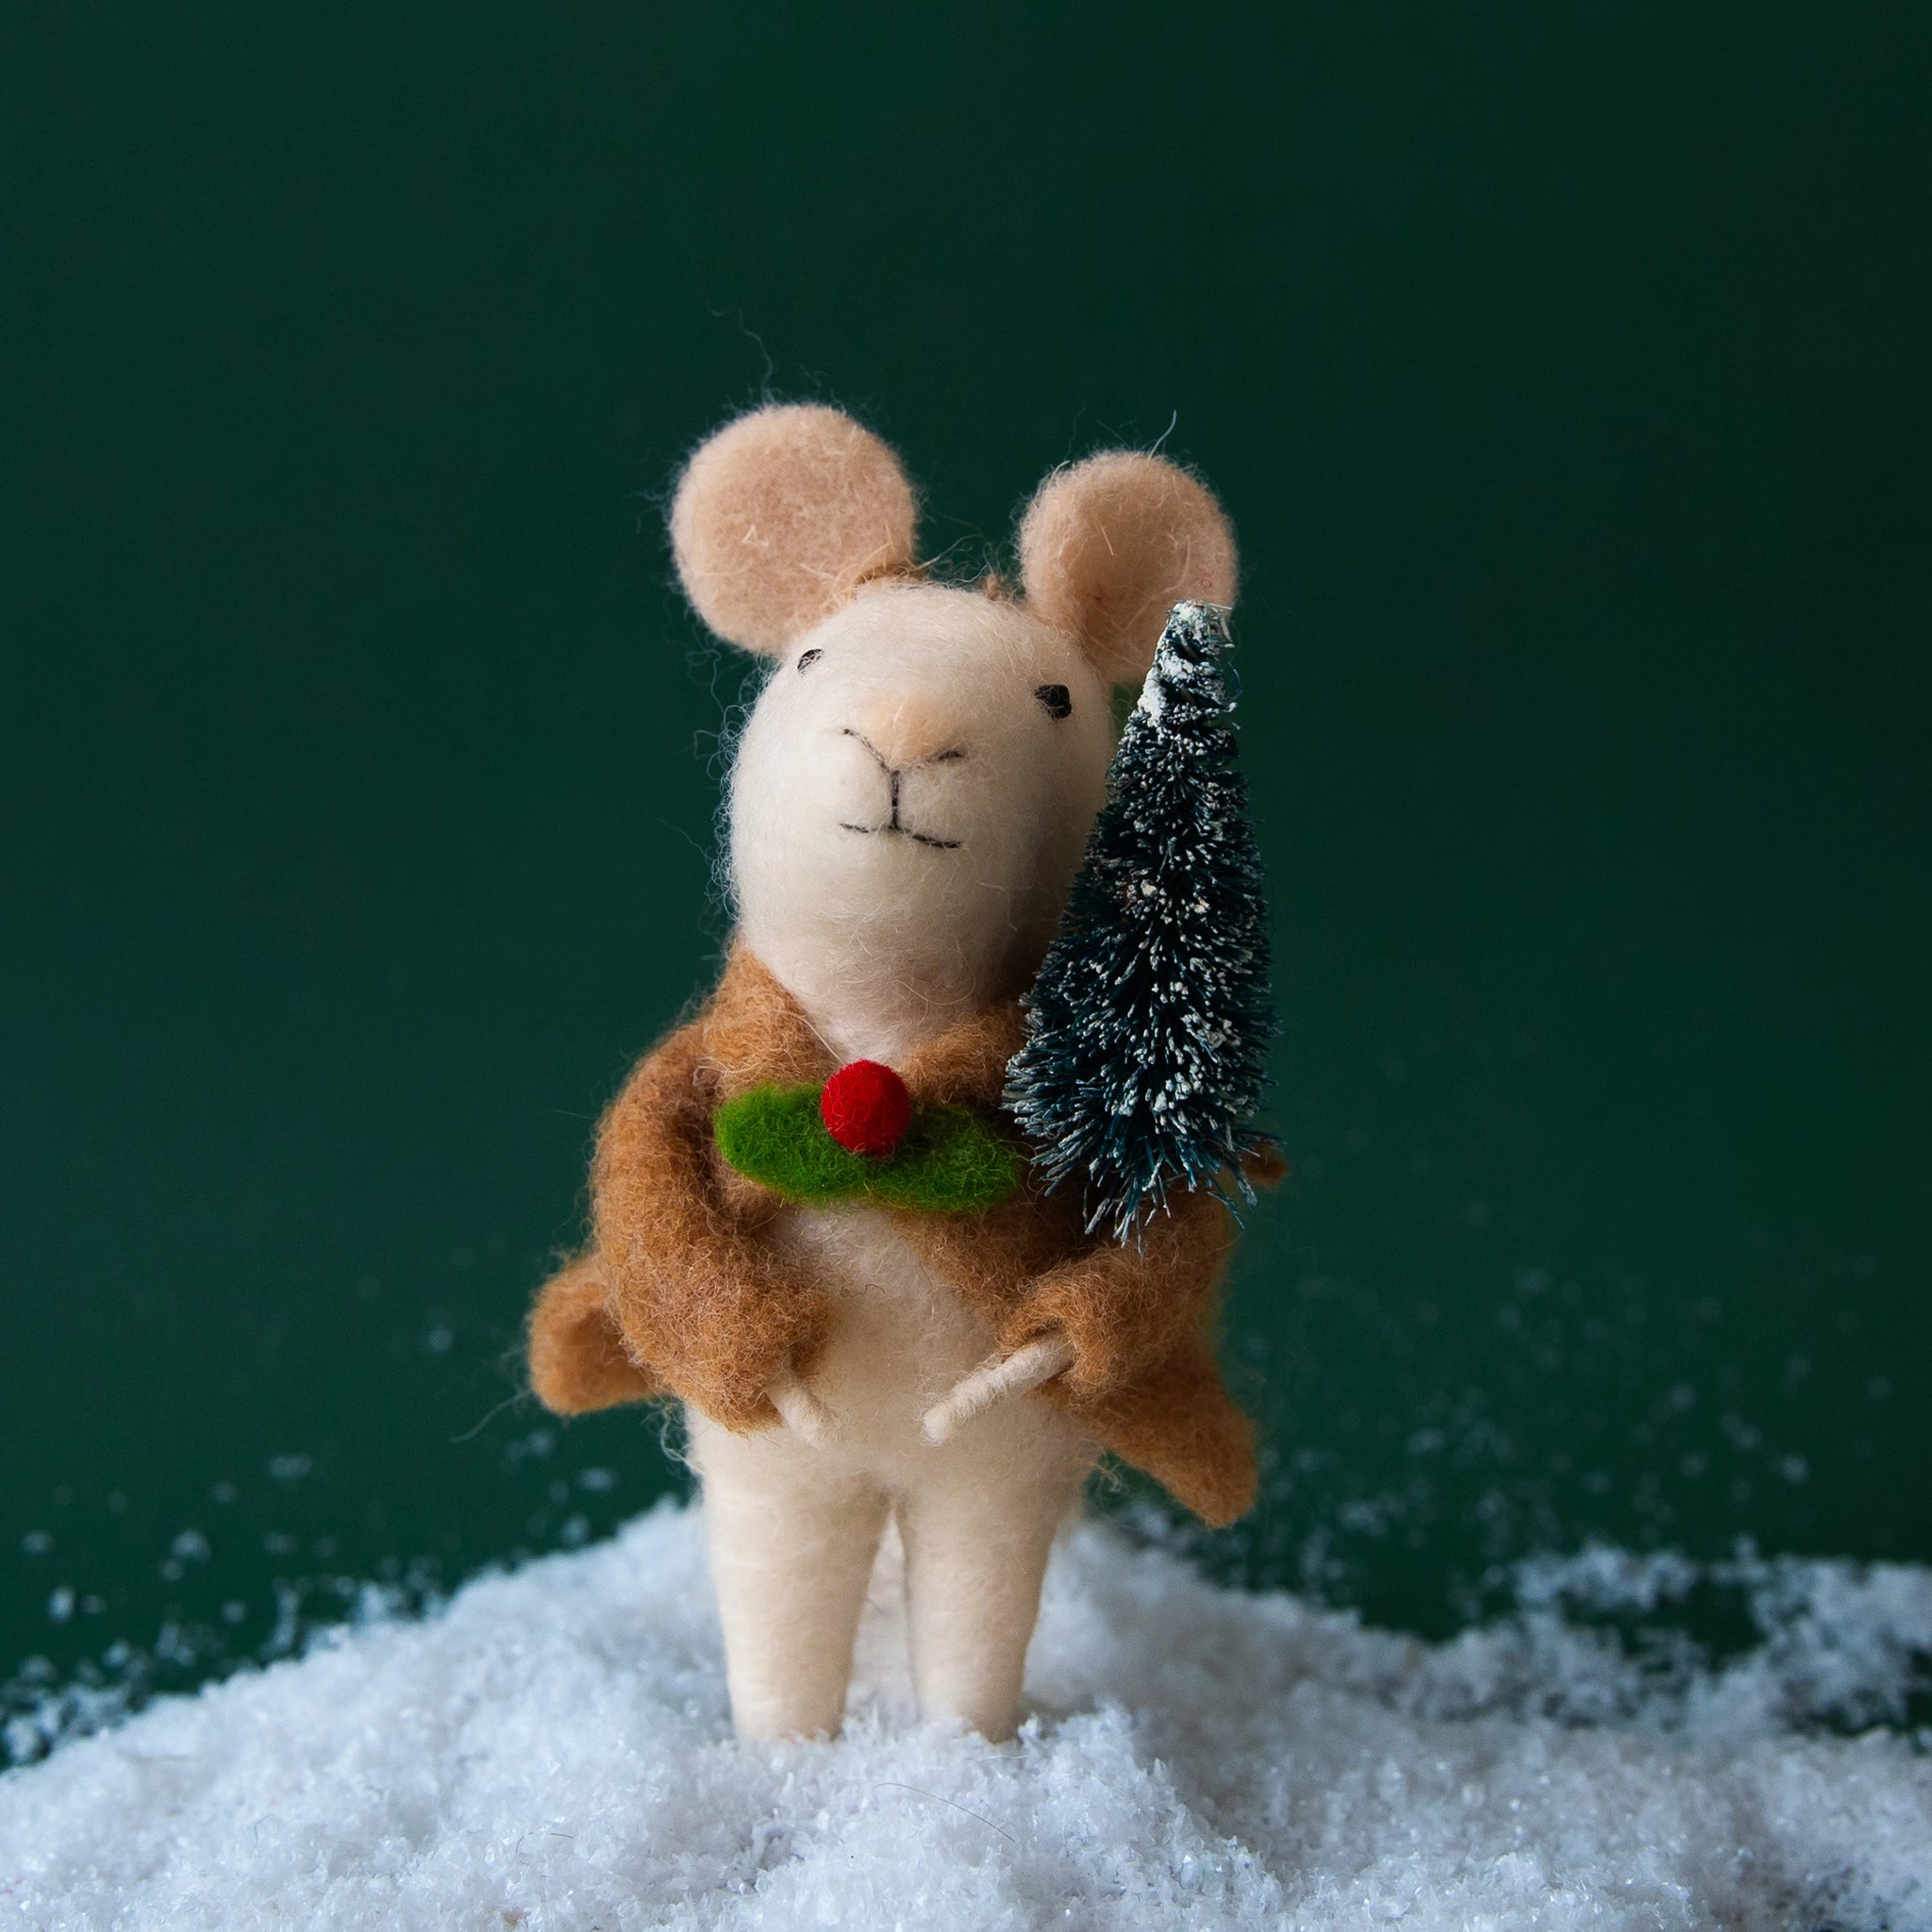 A white felt mouse ornament with a tan jacket on that has holly as the button and holding a small green bristle tree.